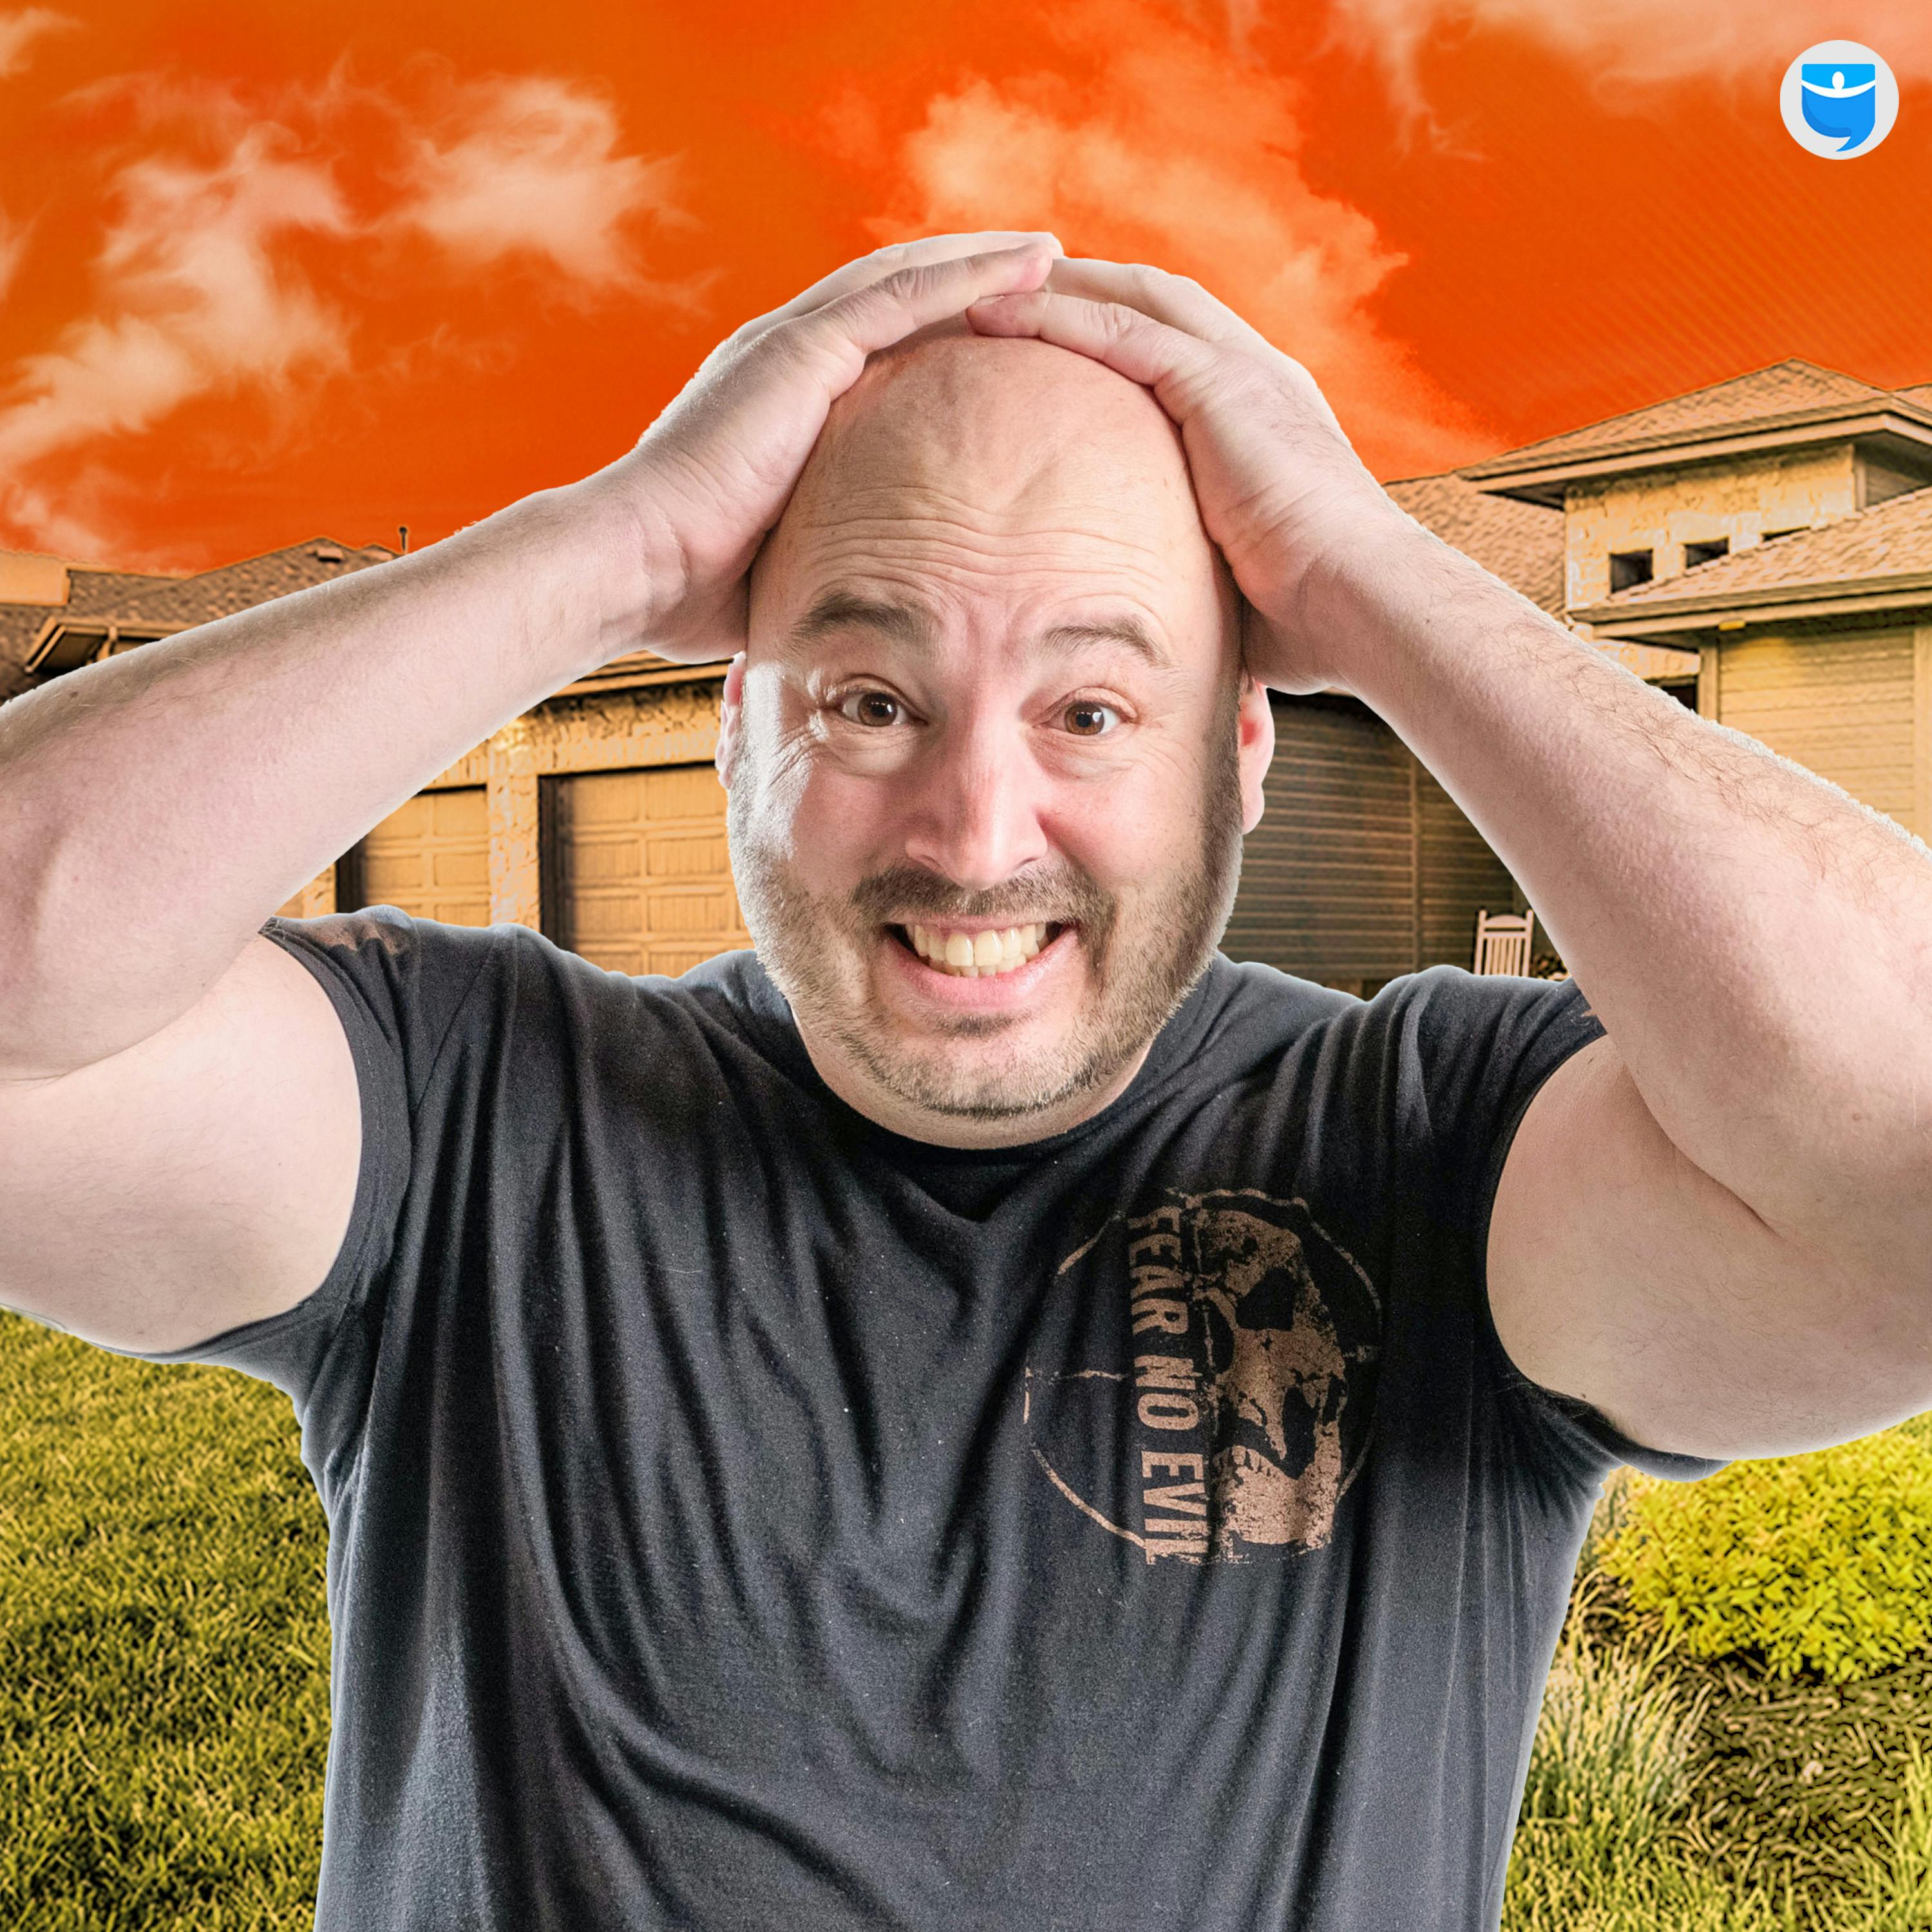 814: BiggerNews: Home Prices to Stall as “Deflation” Concerns Pop Up